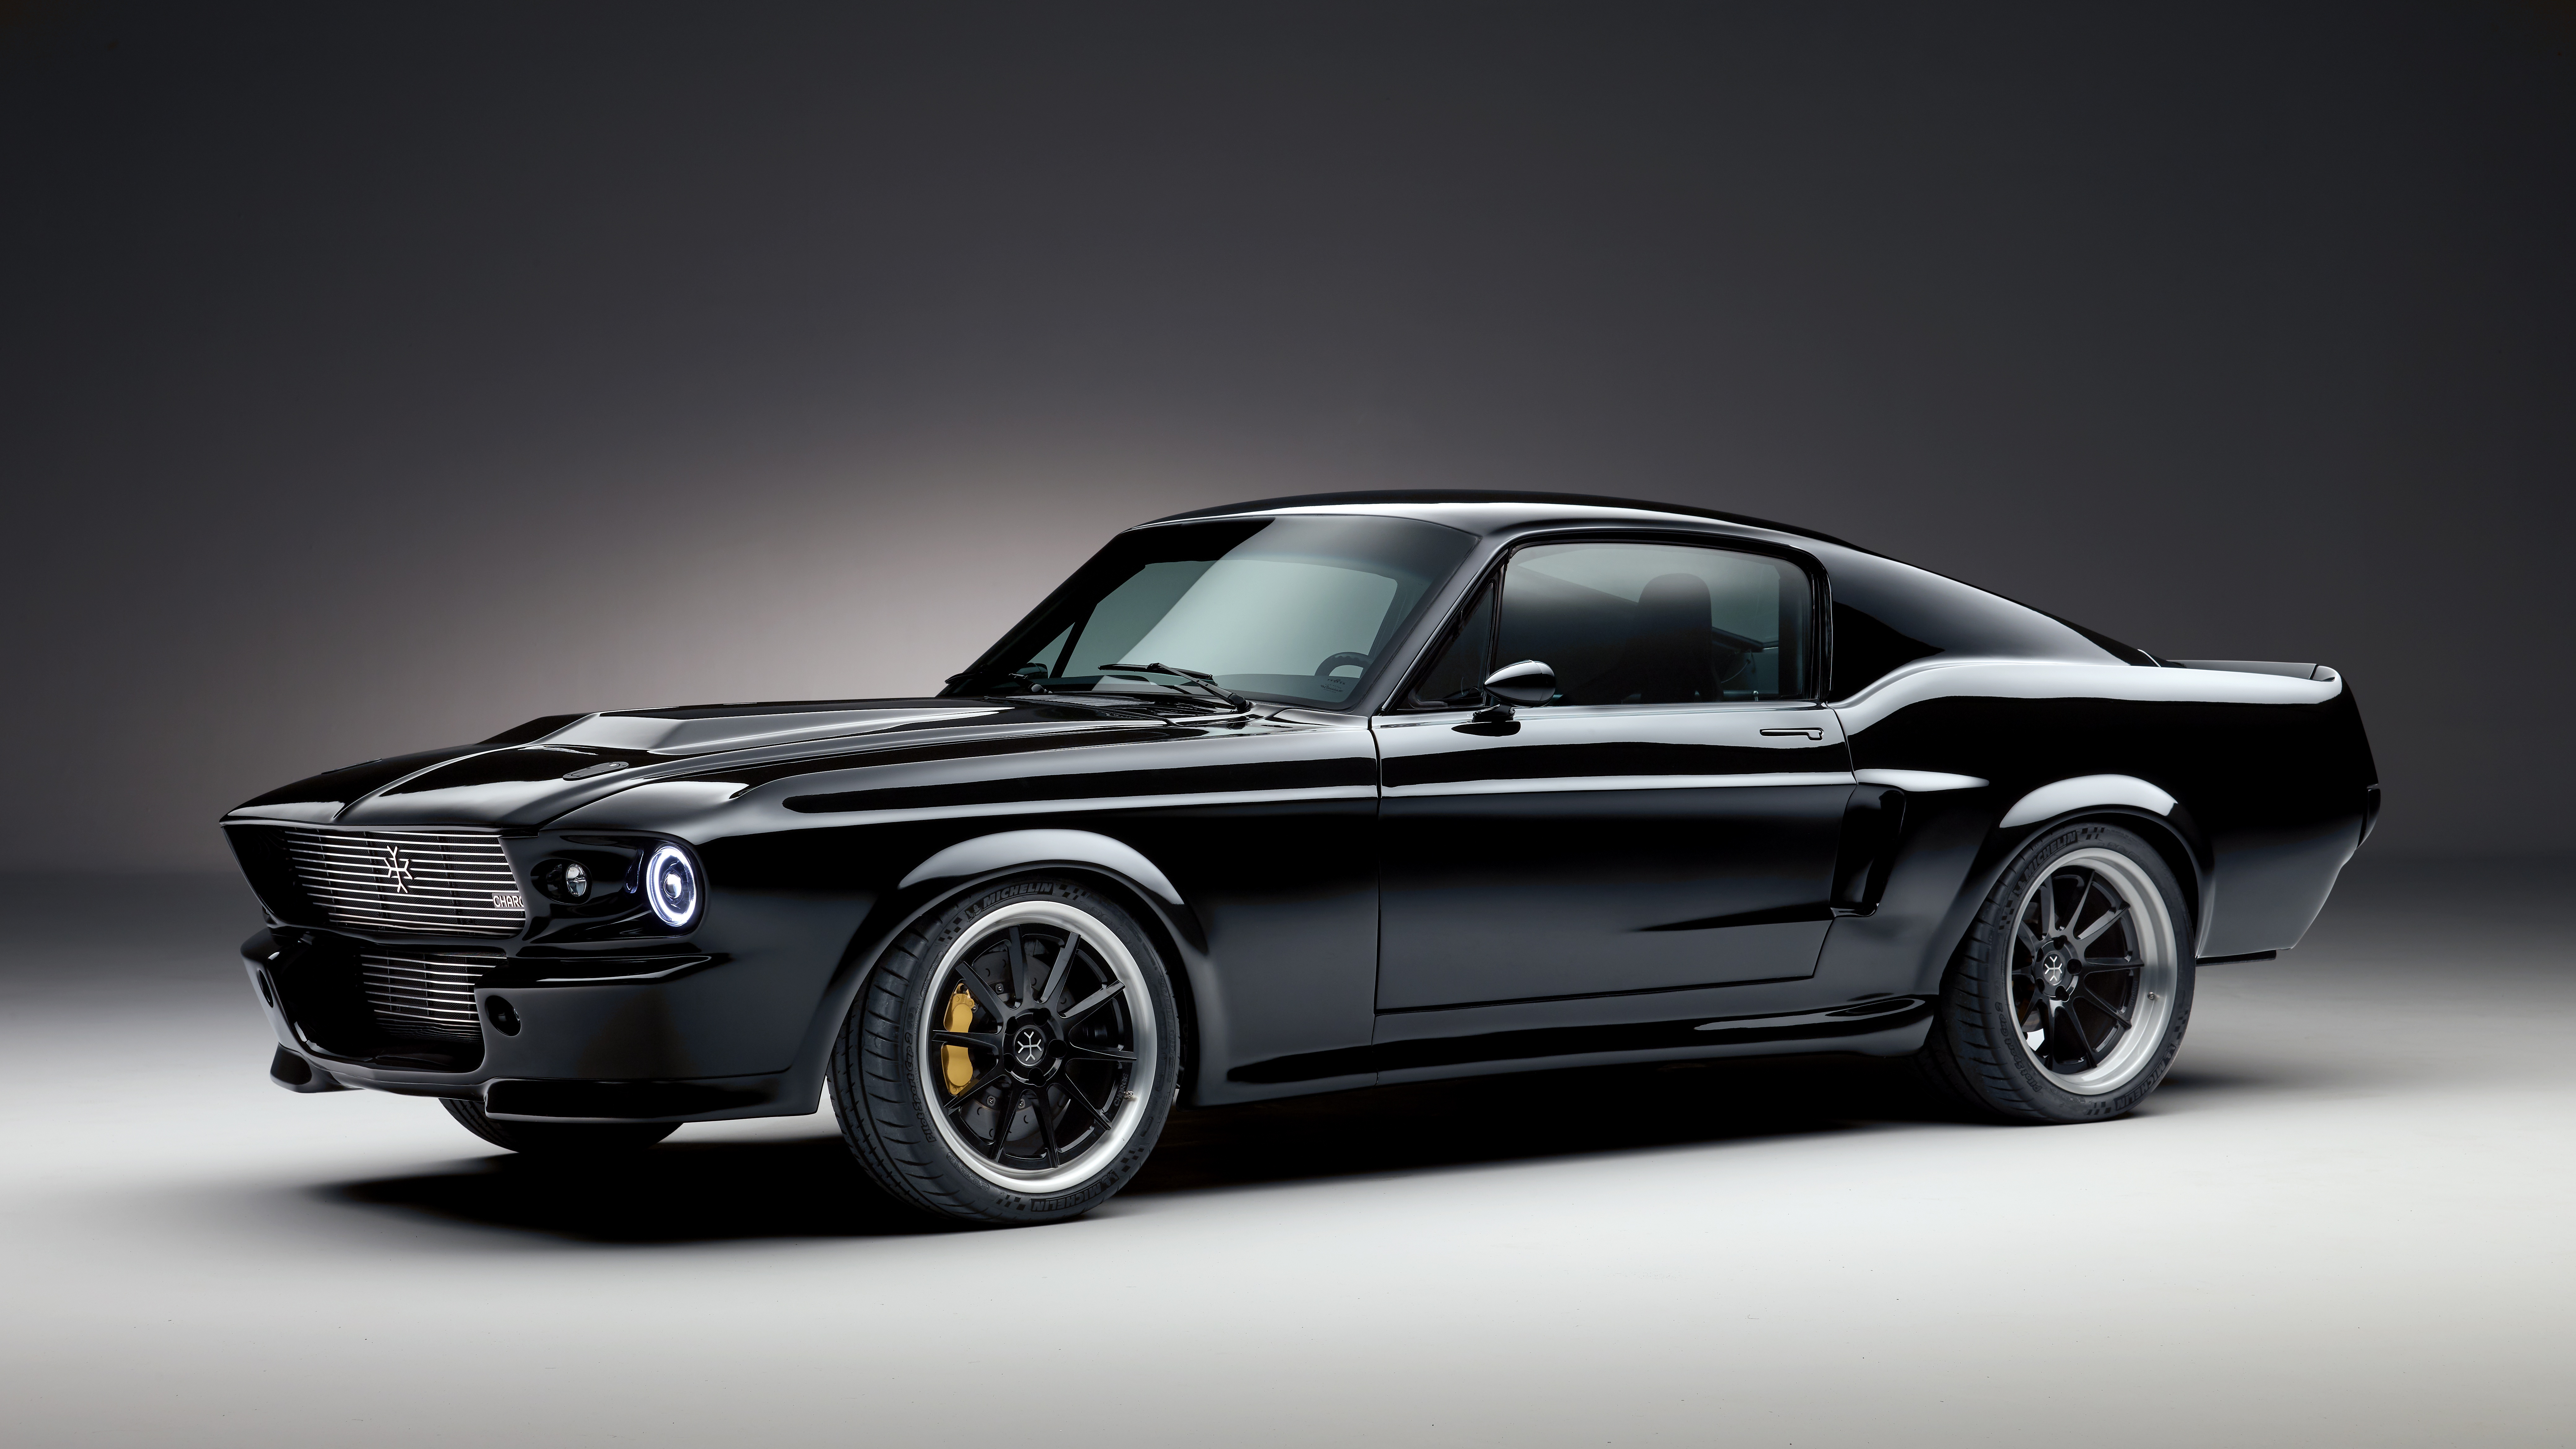 electric car, vehicles, ford mustang, black car, car, ford, muscle car